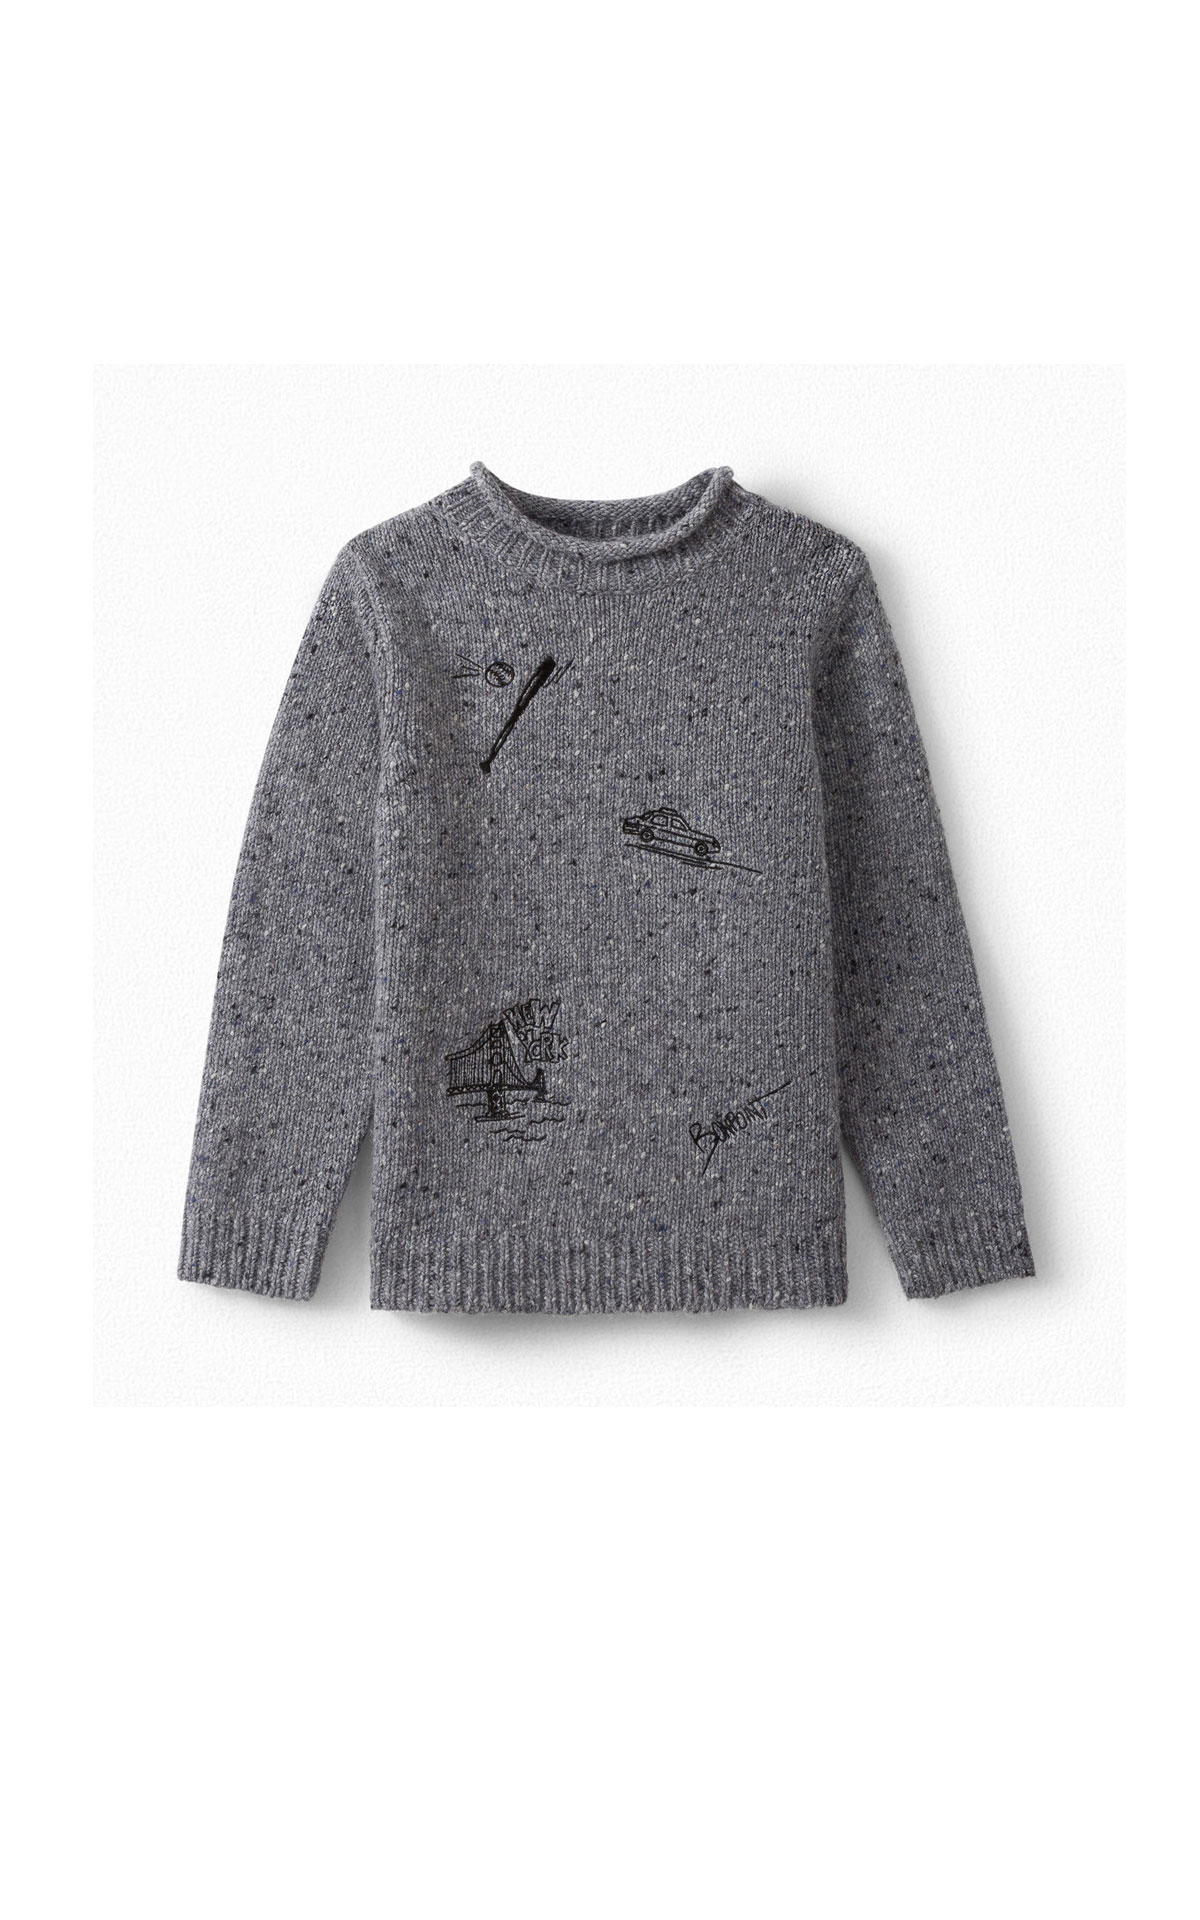 Bonpoint Grey knit sweater  from Bicester Village